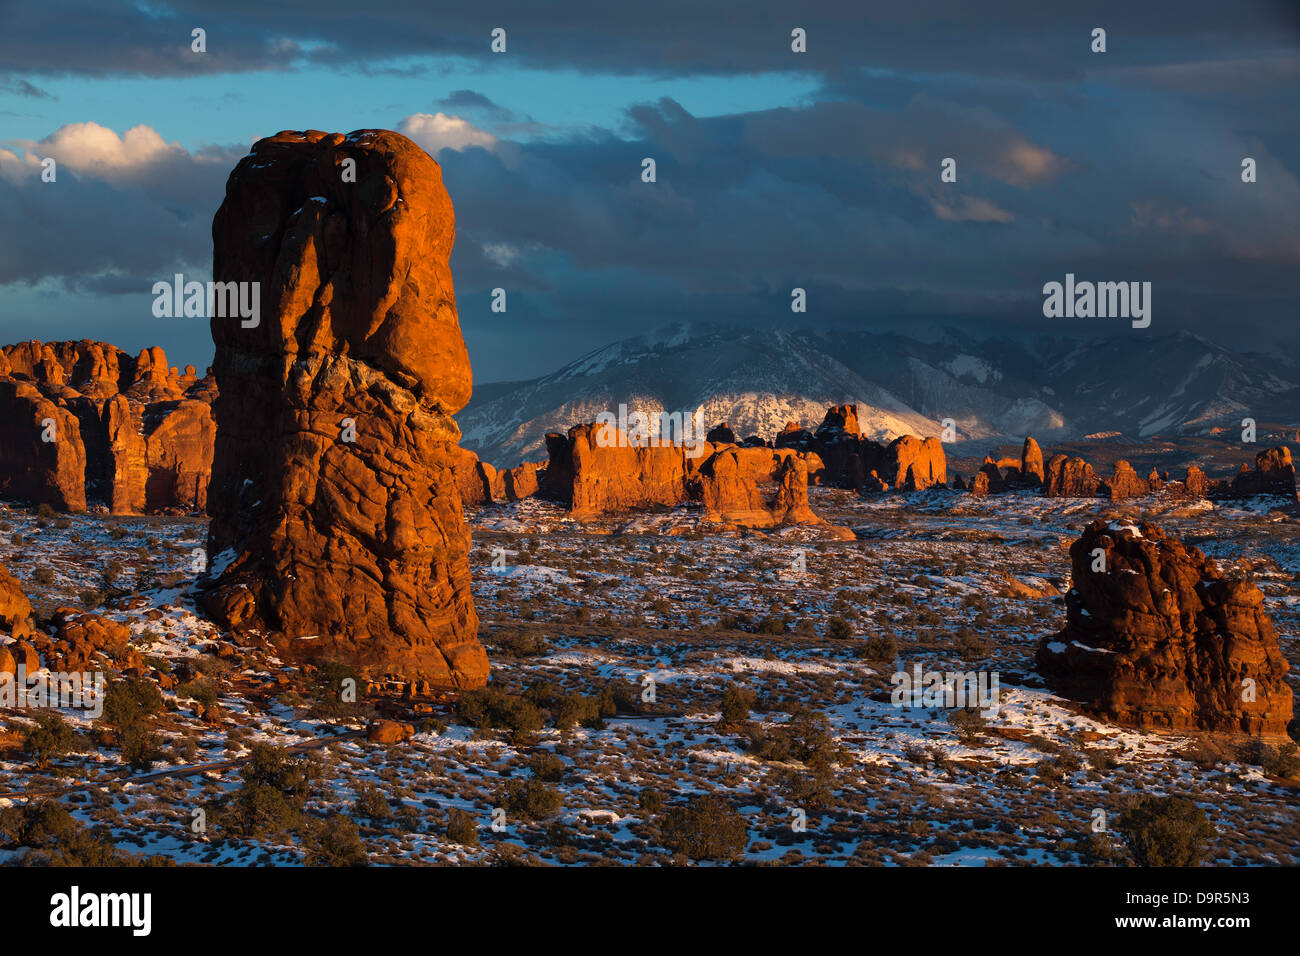 Balanced Rock and the Windows Section with the La Sal Mountains beyond, Arches National Park, Utah, USA Stock Photo